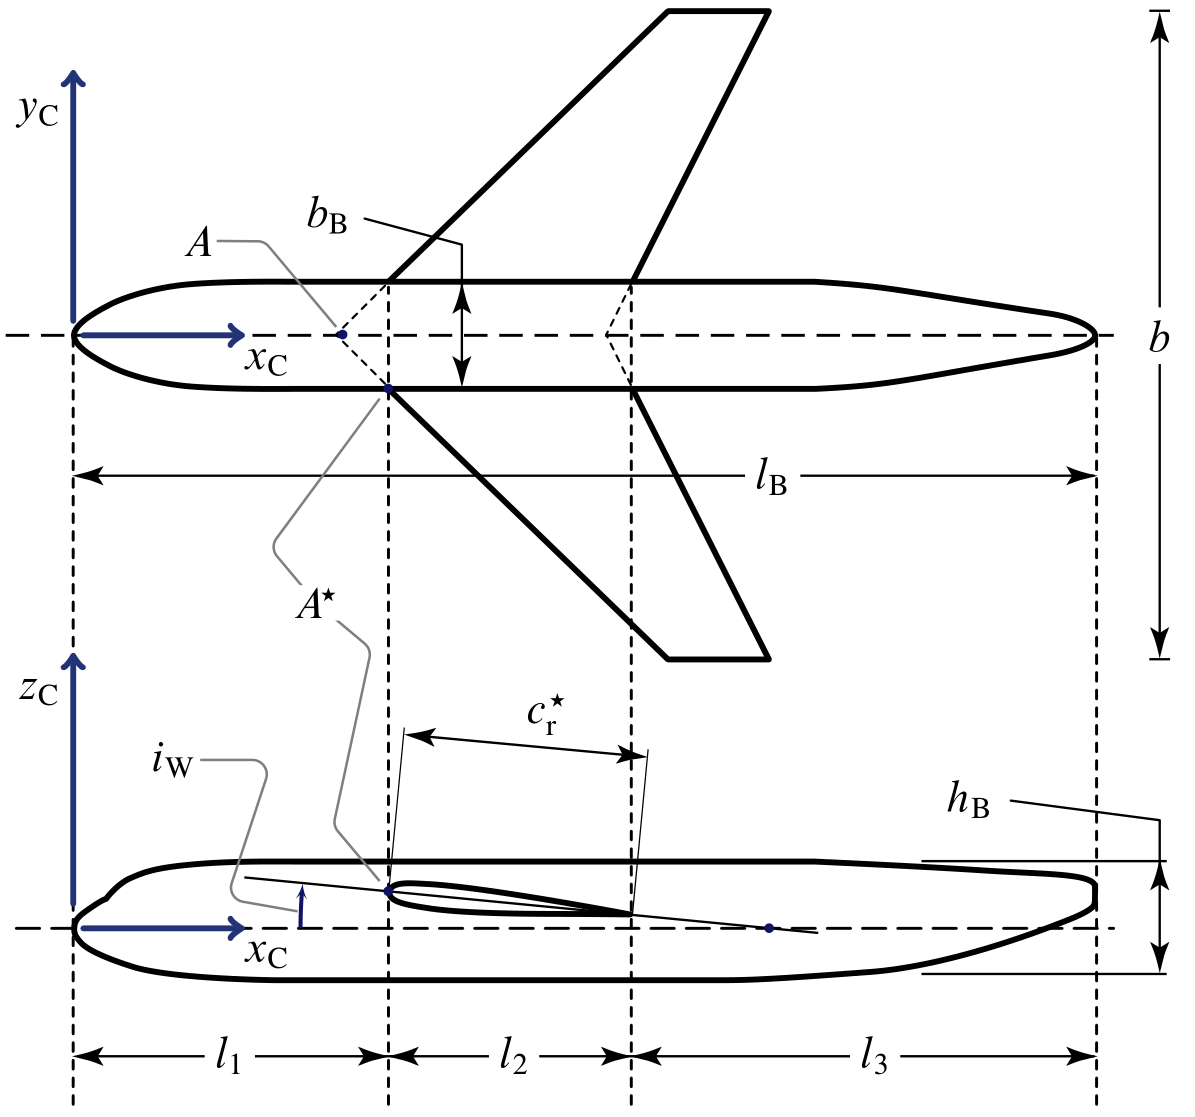 Nomenclature of wing-fuselage combination (side view).